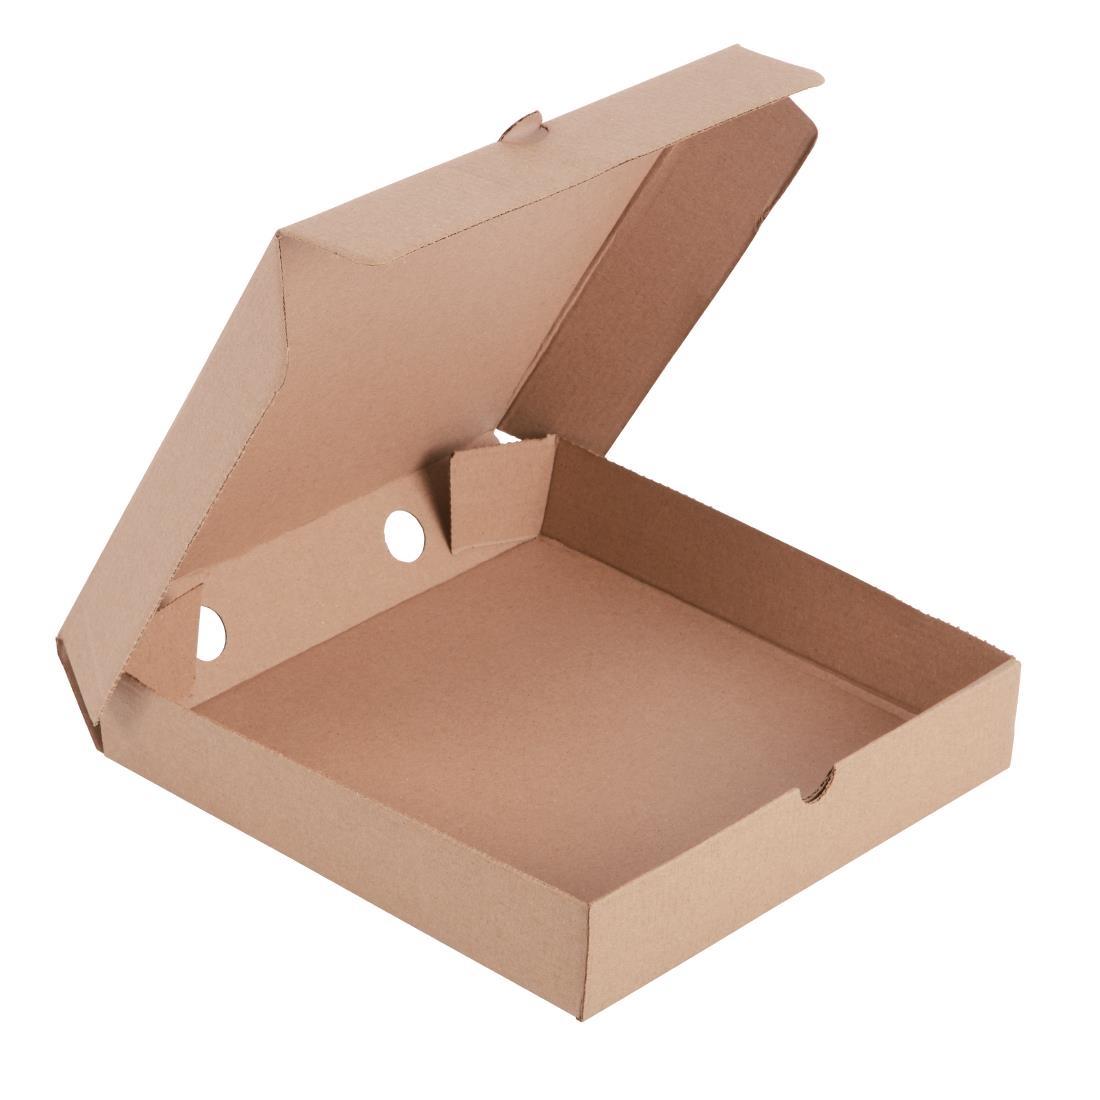 Fiesta Compostable Plain Pizza Boxes 9" (Pack of 100) - DC723  - 2